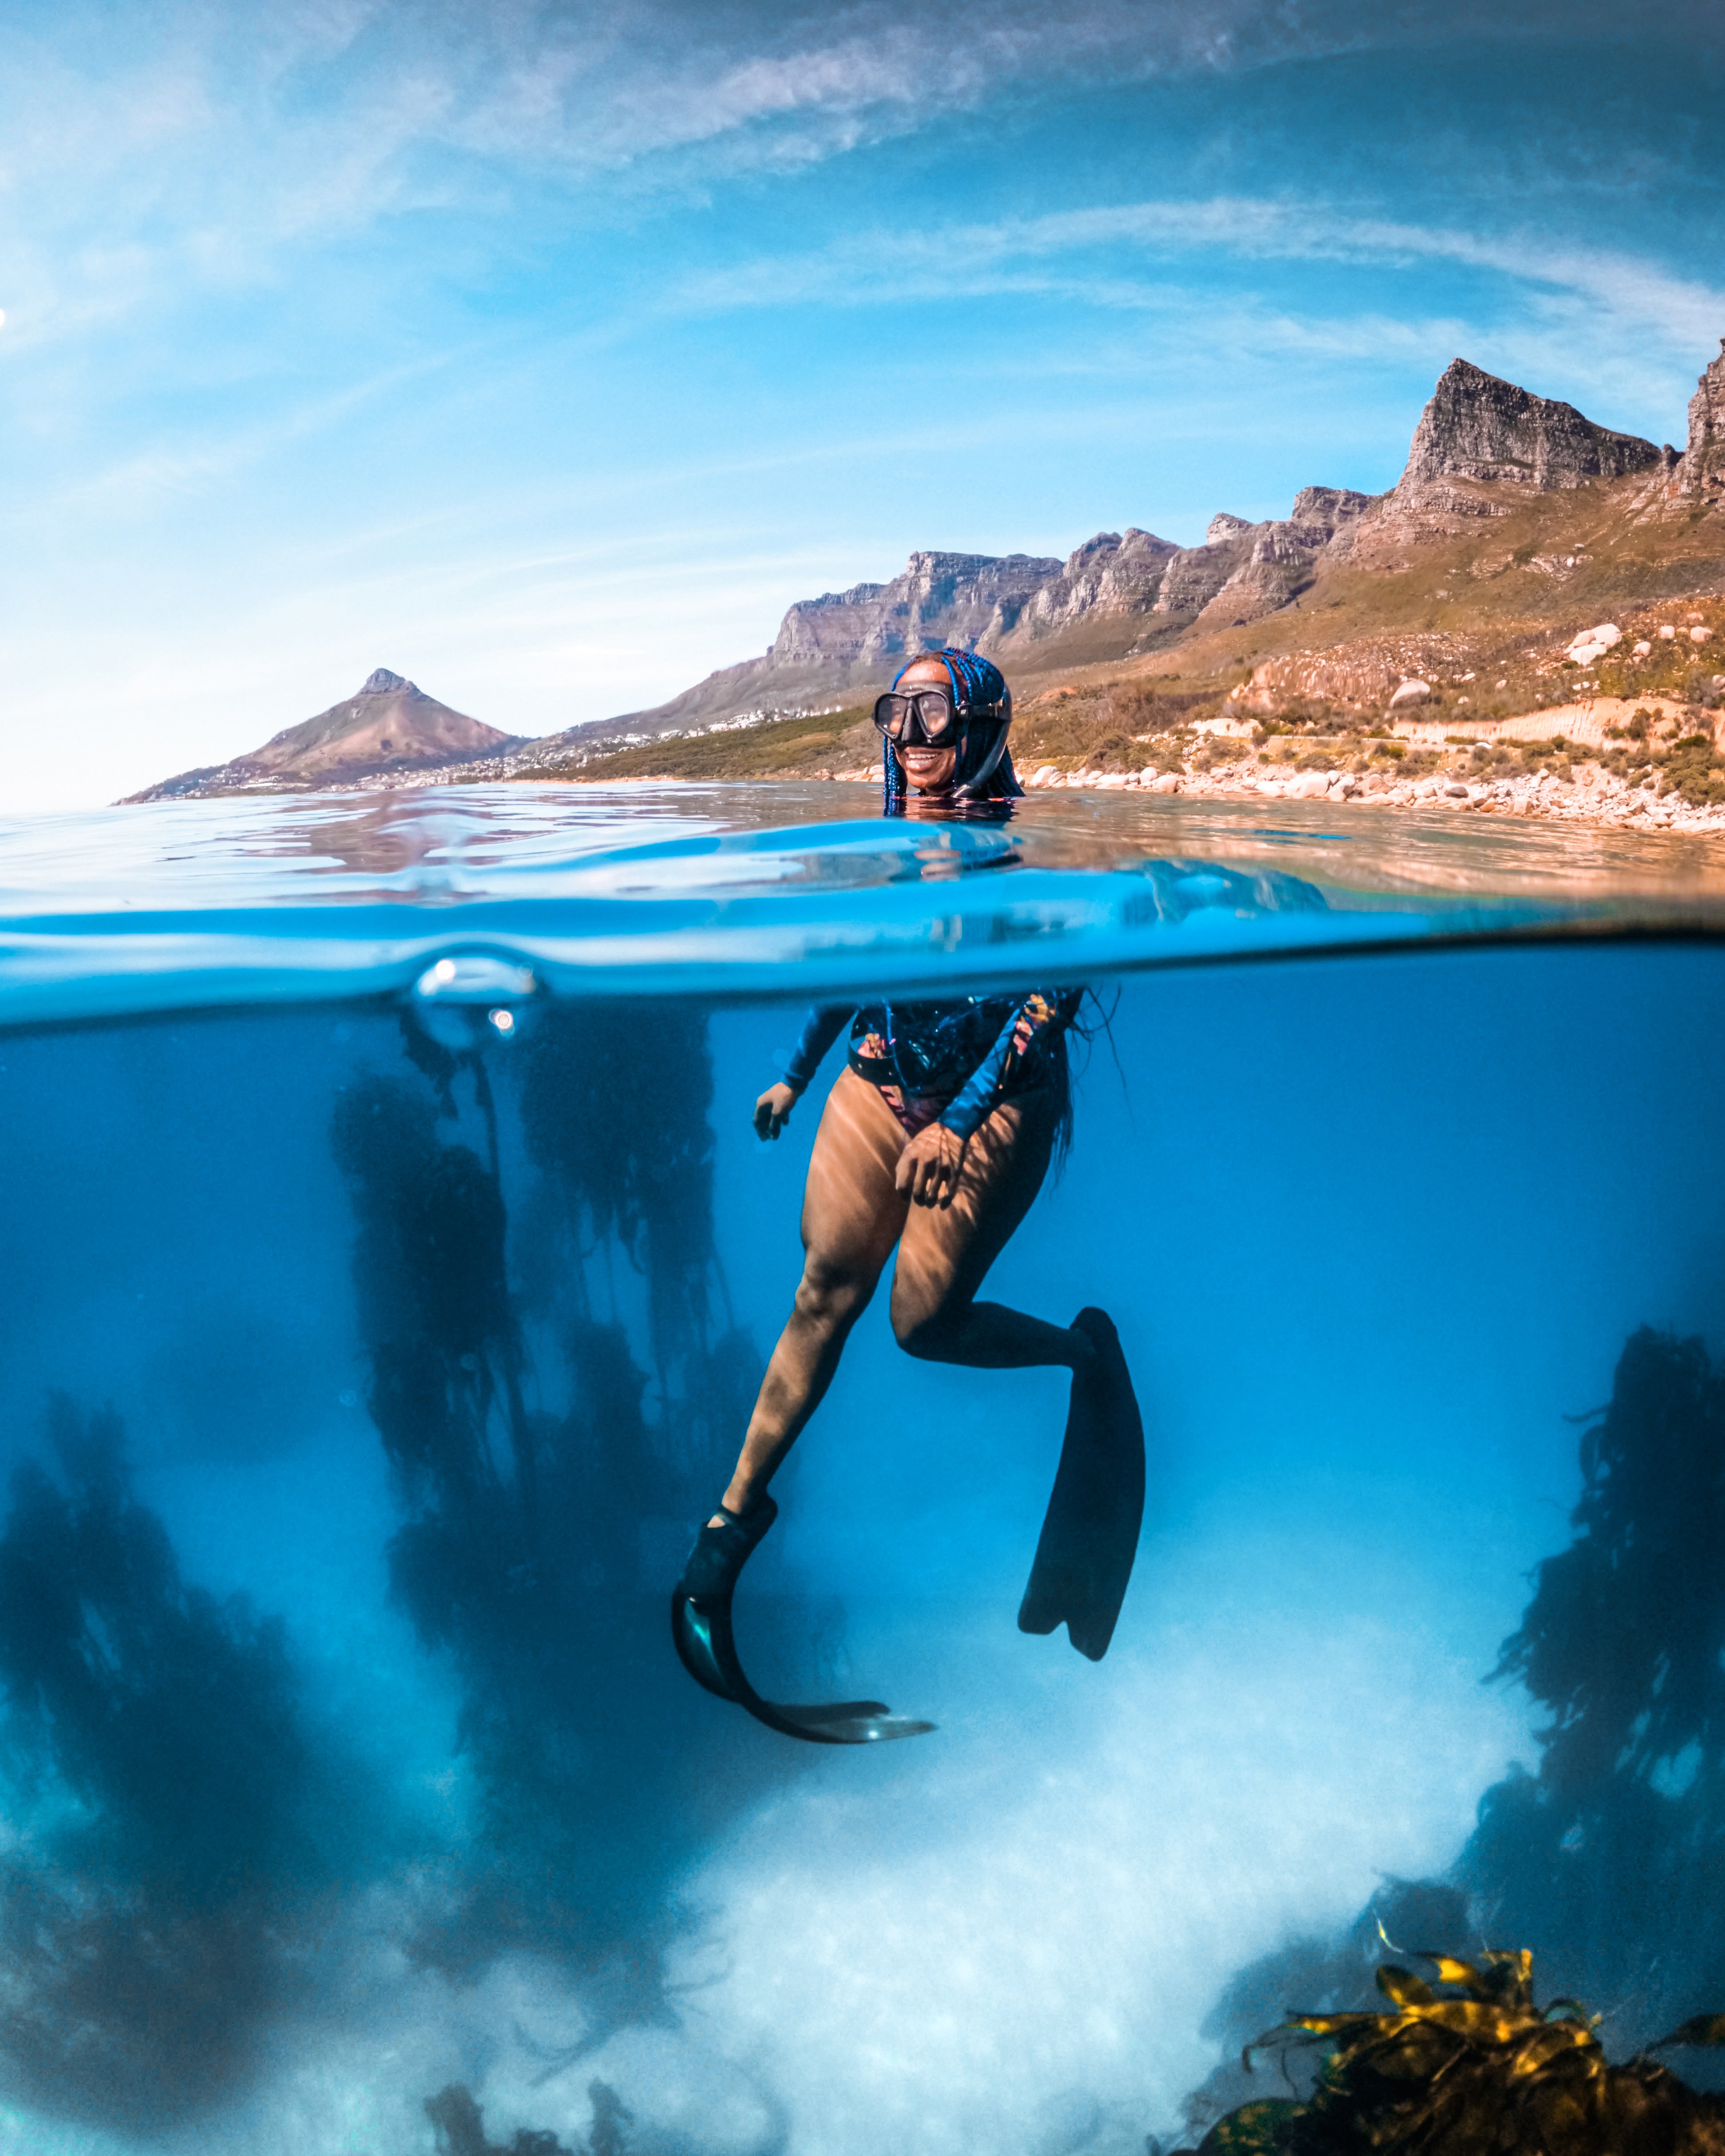 Can I use iPhone for underwater photos?